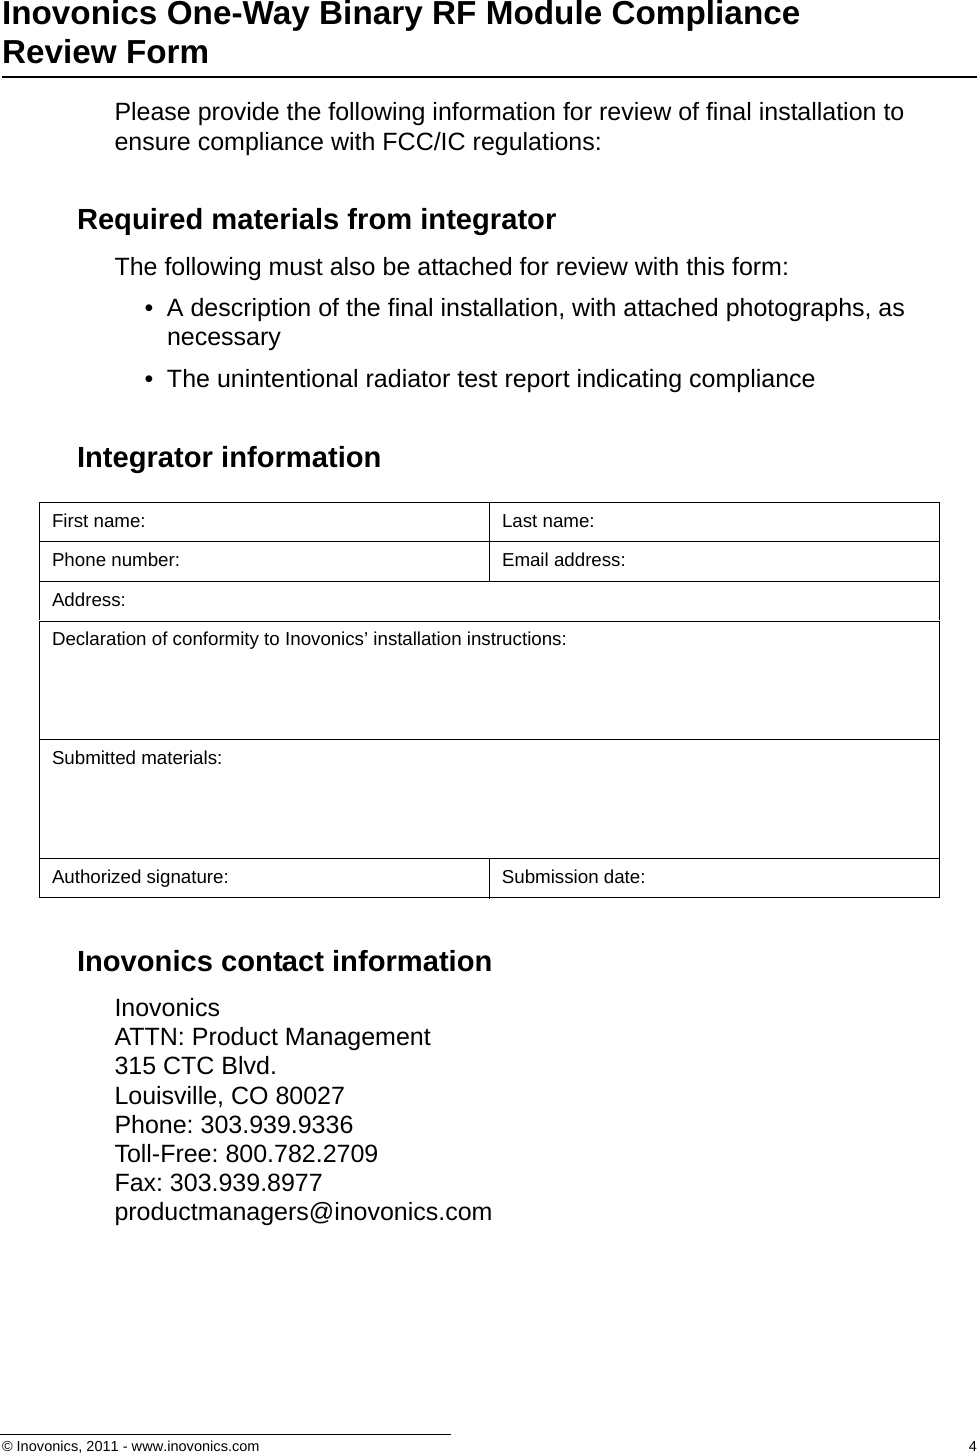 © Inovonics, 2011 - www.inovonics.com  4Inovonics One-Way Binary RF Module Compliance Review FormPlease provide the following information for review of final installation to ensure compliance with FCC/IC regulations:Required materials from integratorThe following must also be attached for review with this form:• A description of the final installation, with attached photographs, as necessary• The unintentional radiator test report indicating complianceIntegrator informationInovonics contact informationInovonics ATTN: Product Management315 CTC Blvd.Louisville, CO 80027Phone: 303.939.9336Toll-Free: 800.782.2709Fax: 303.939.8977productmanagers@inovonics.comFirst name: Last name:Phone number: Email address:Address:Declaration of conformity to Inovonics’ installation instructions:Submitted materials:Authorized signature: Submission date: